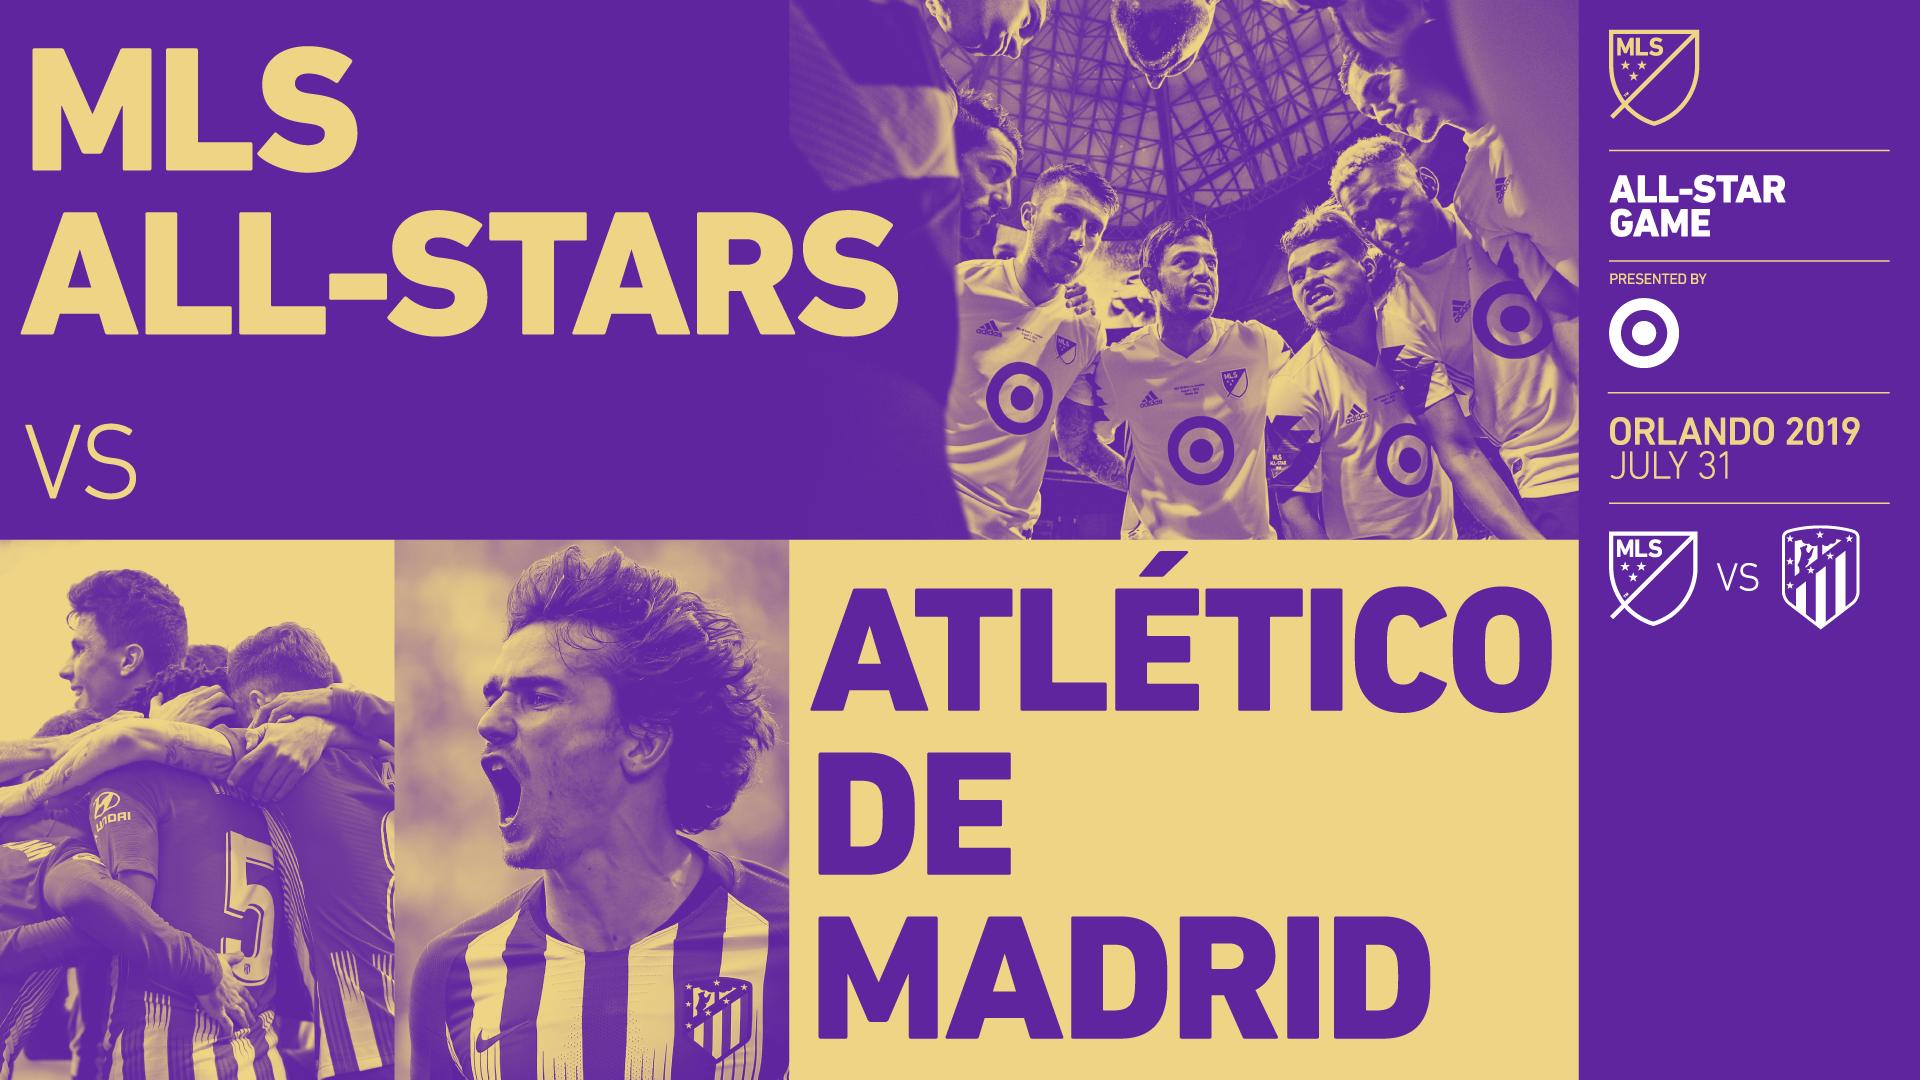 Atlético De Madrid To Play Against MLS All-Star